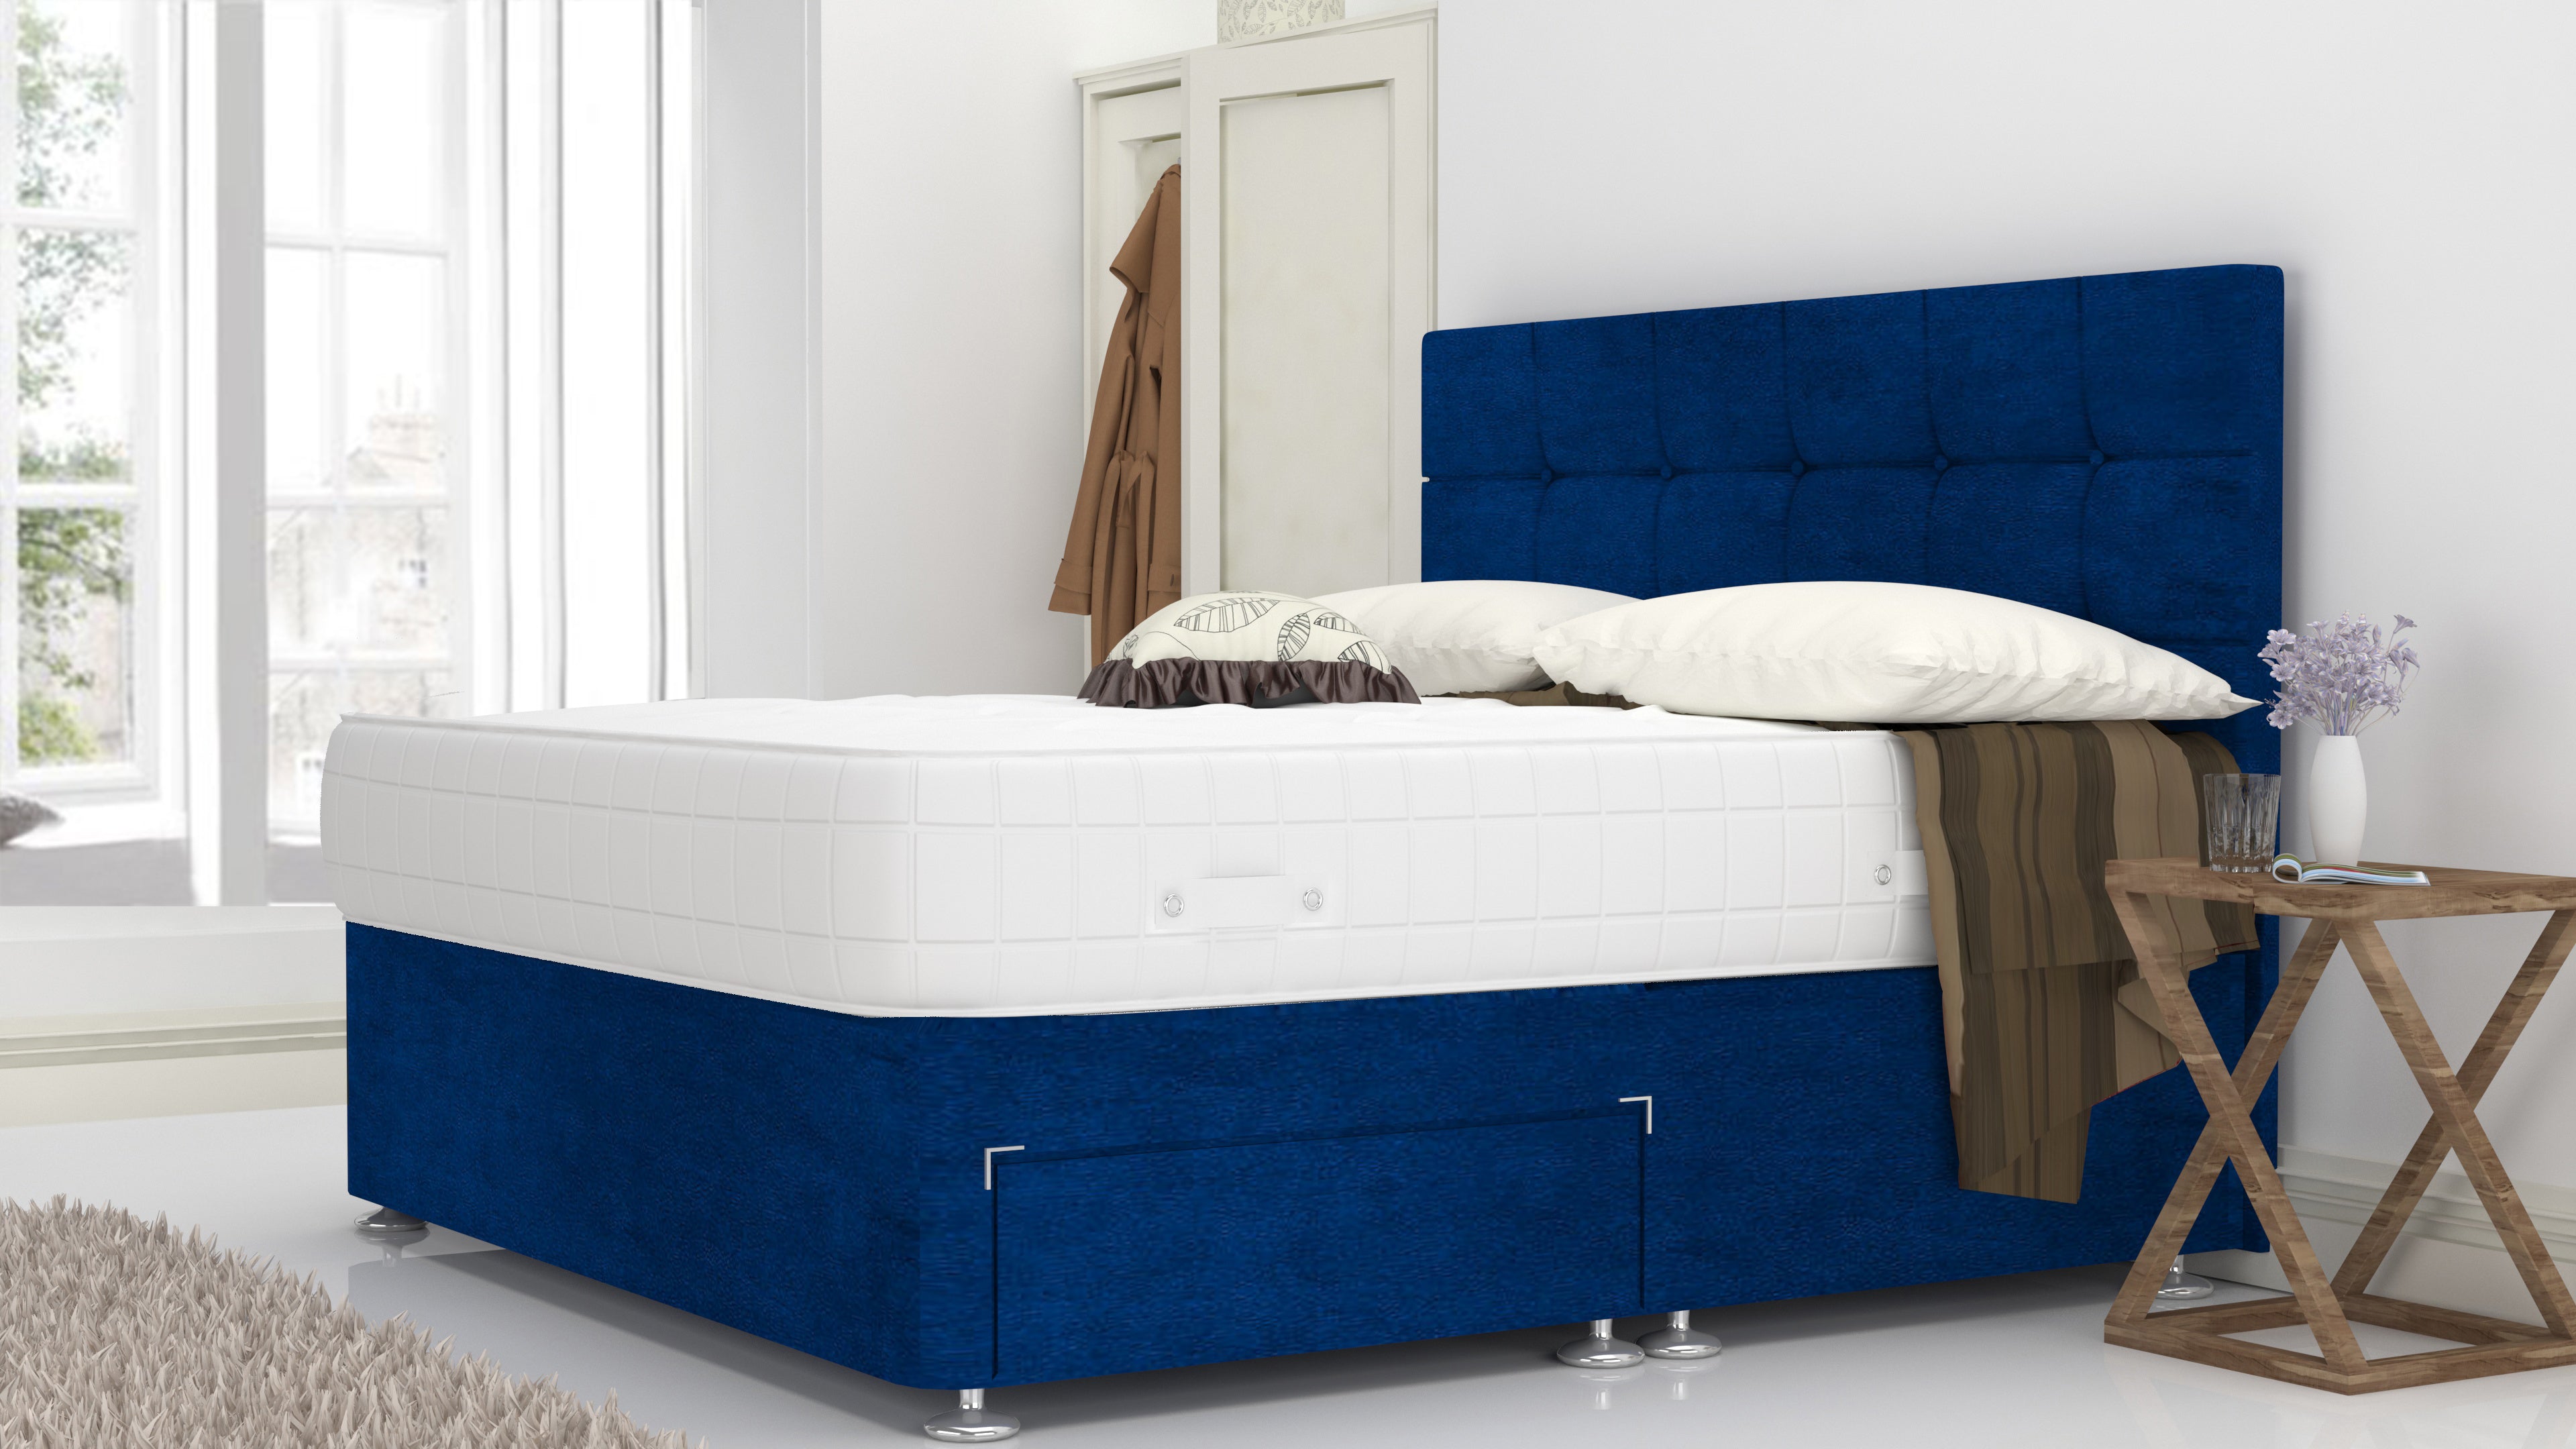 Blue Plush 5 Feet Divan Bed Set With Cube Headboard (Included Feet) And Free Orthopedic Mattress